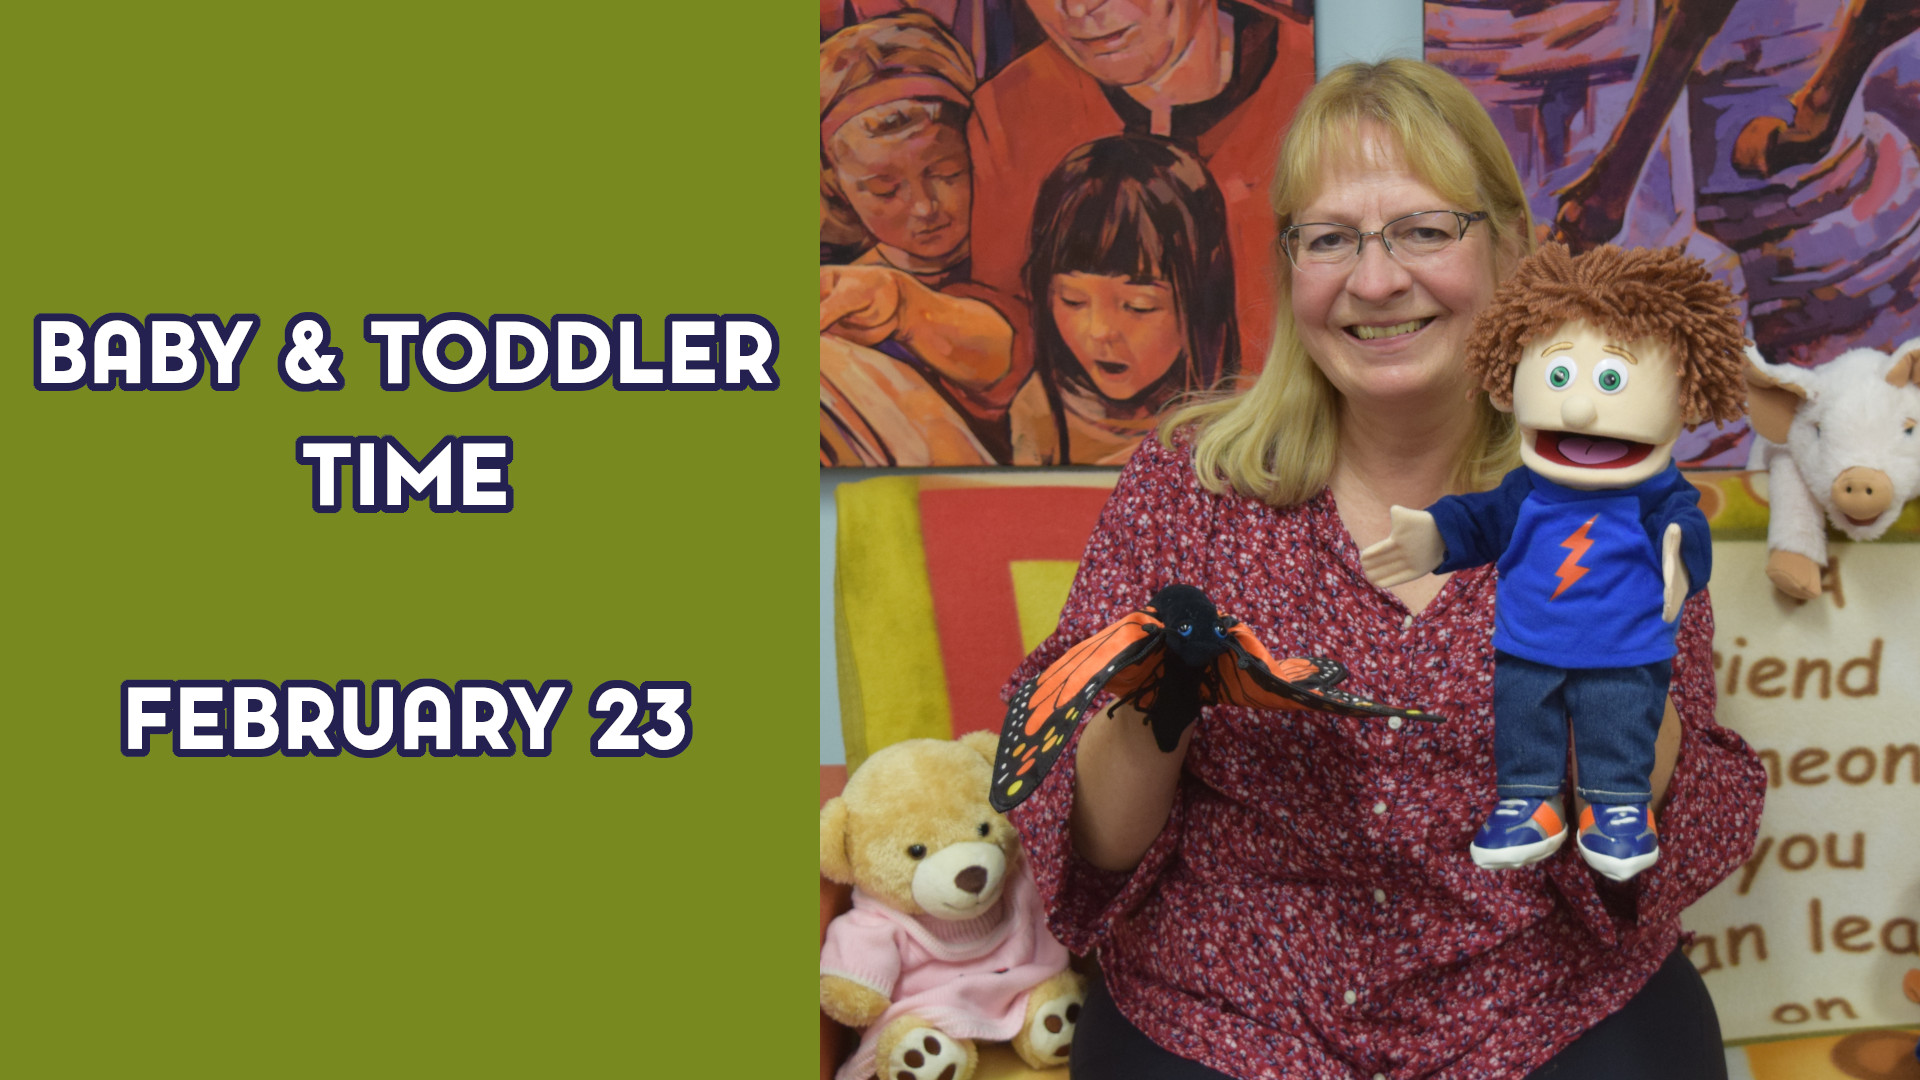 A woman holds puppets next to the text "Baby and Toddler Time February 23"